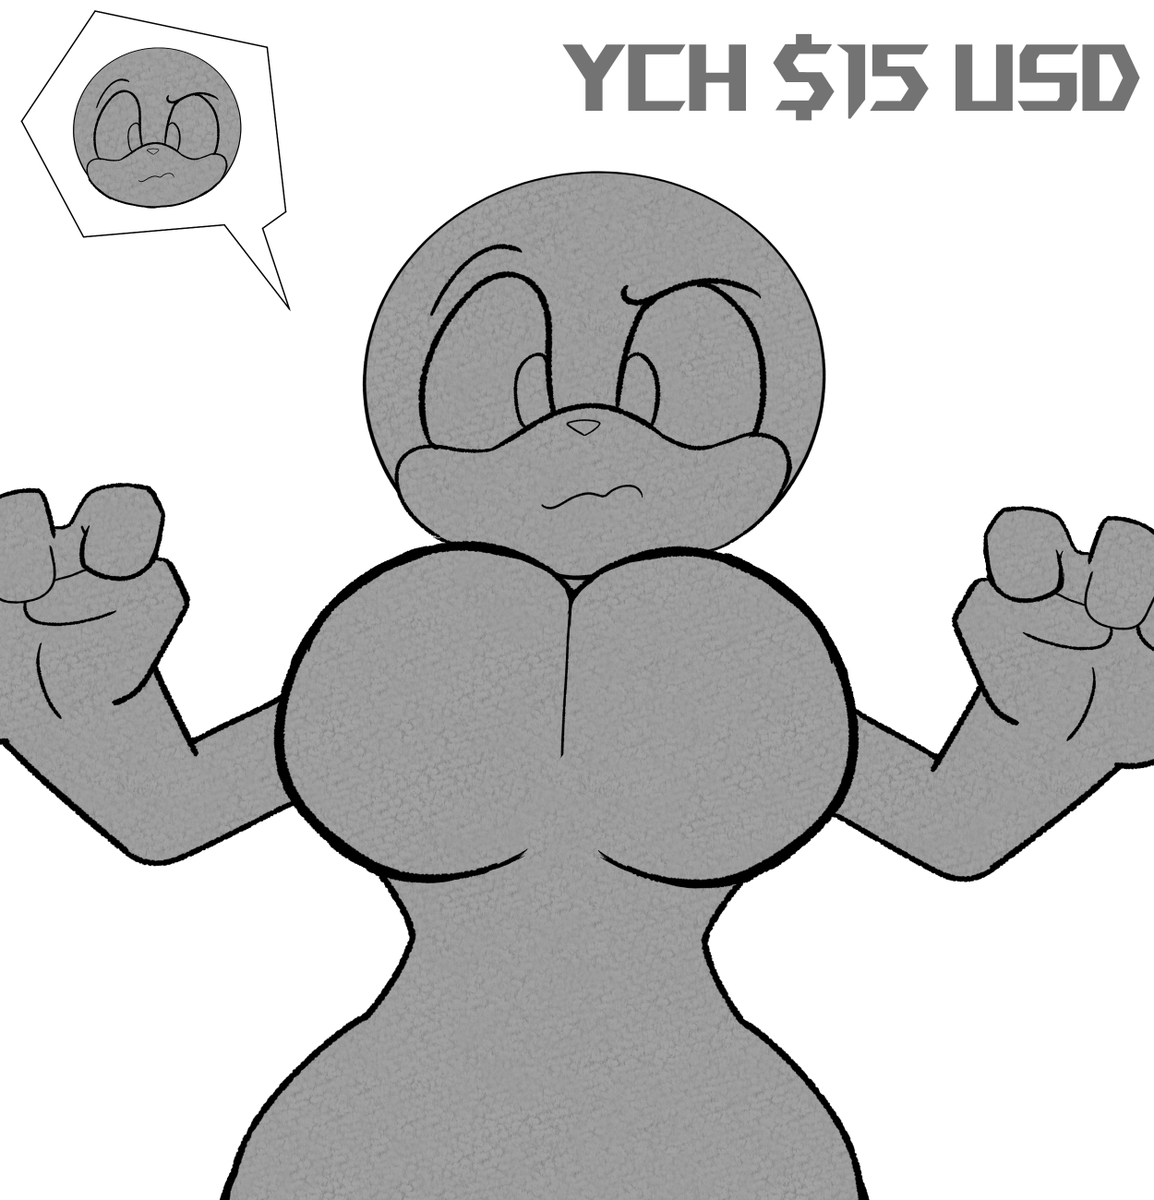 NEW YCH $15 USD / 3 Slosts Available

- Only for sonic oc/characters

- Can be both head swap and body swap

- No NFSW

#BodySwapArt